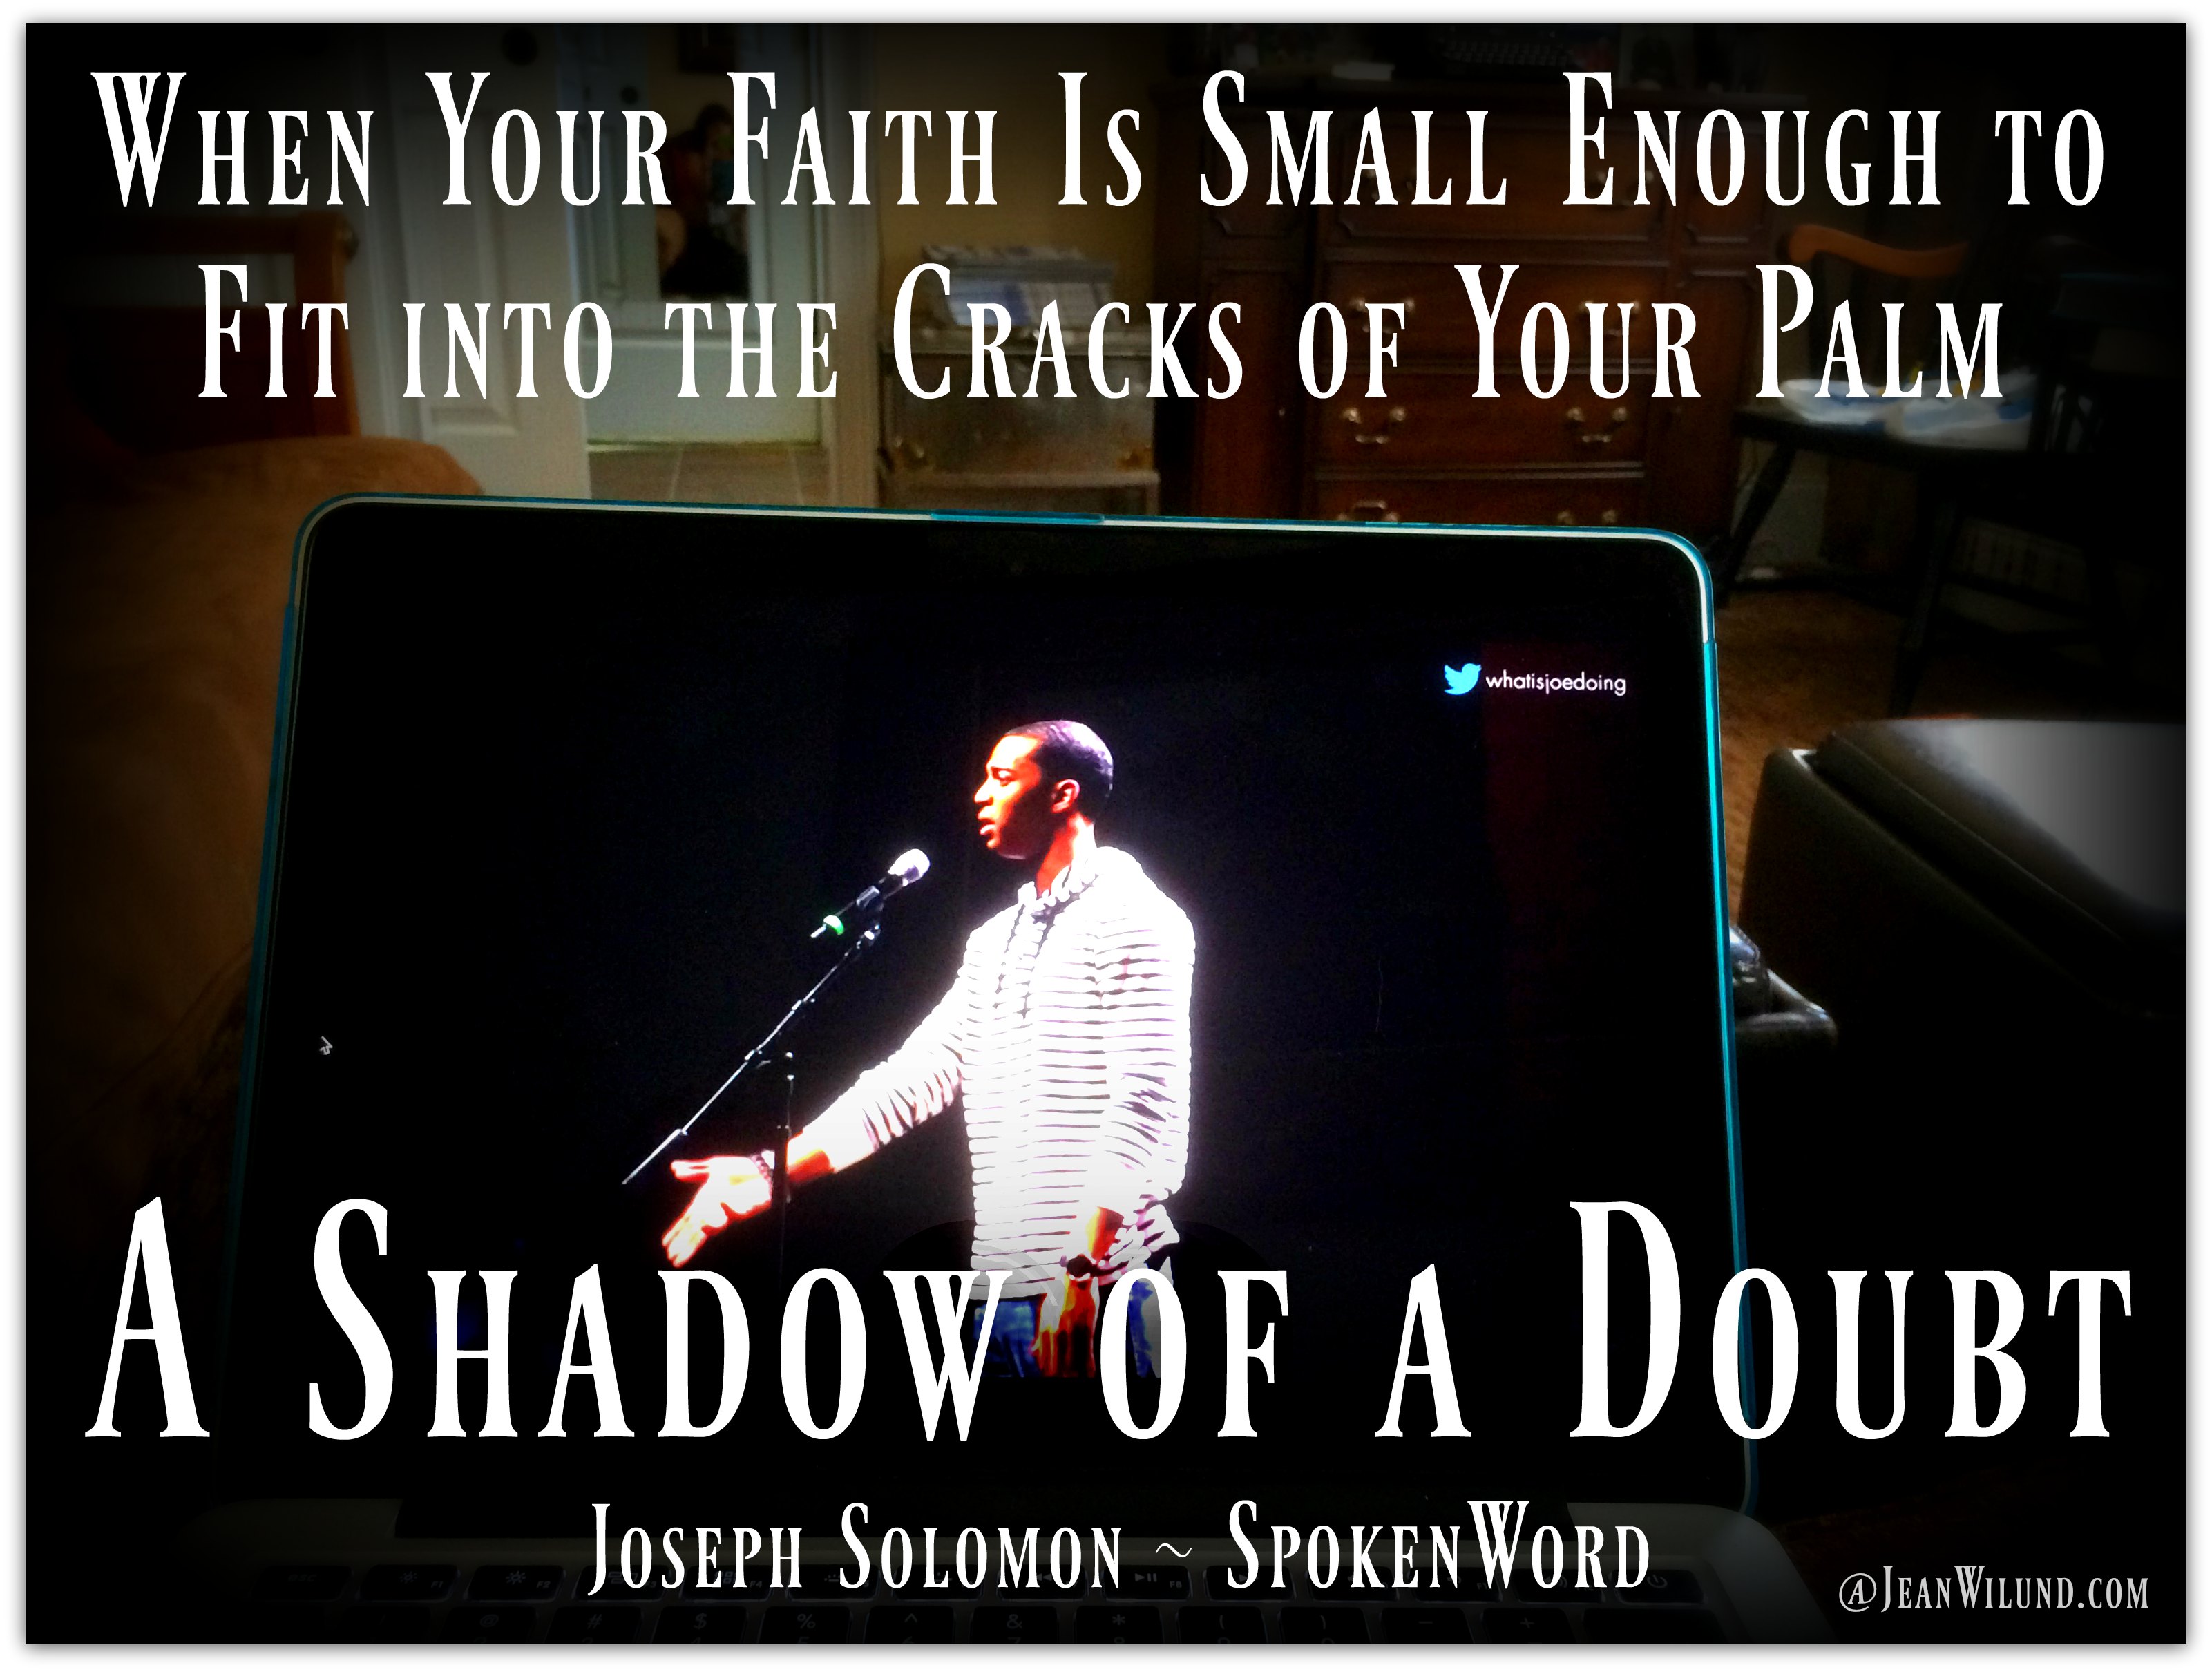 Joseph Solomon's powerful video: A Shadow of Doubt for when your faith is small enough to fit into the cracks of your palm. #faith #doubt #God